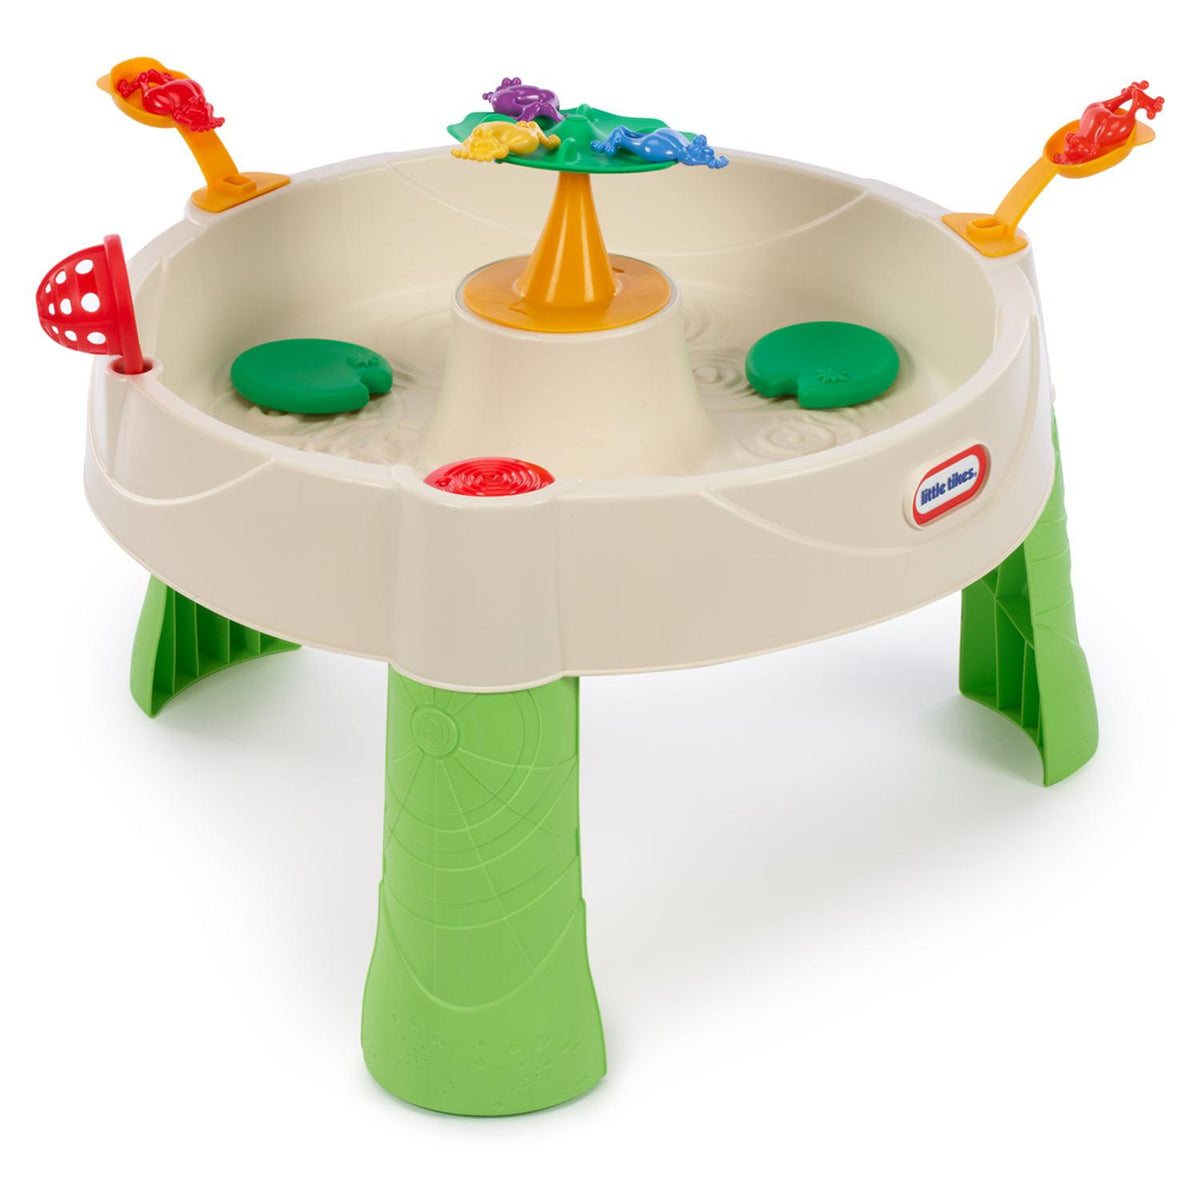 Frog Pond Water Table Little Tikes Replacement Parts